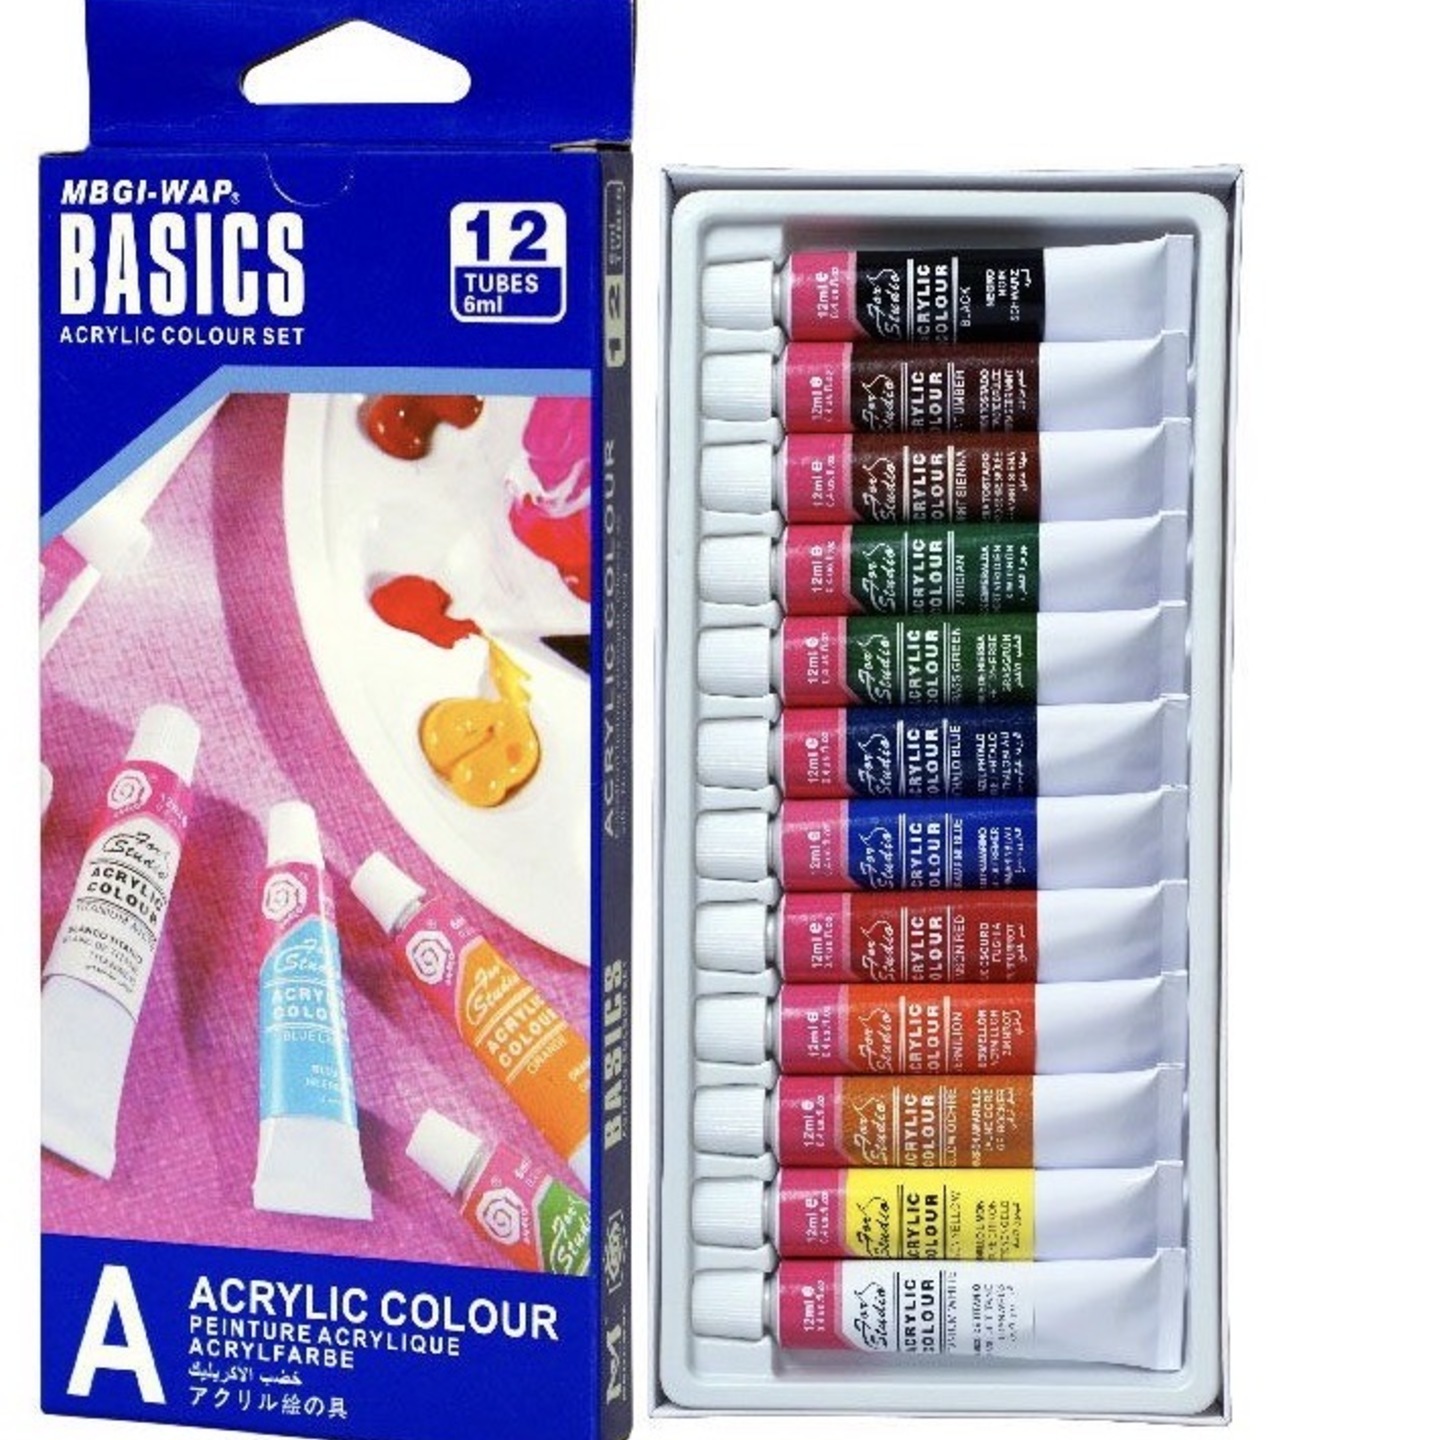 Acrylic Paint for miniature food craft